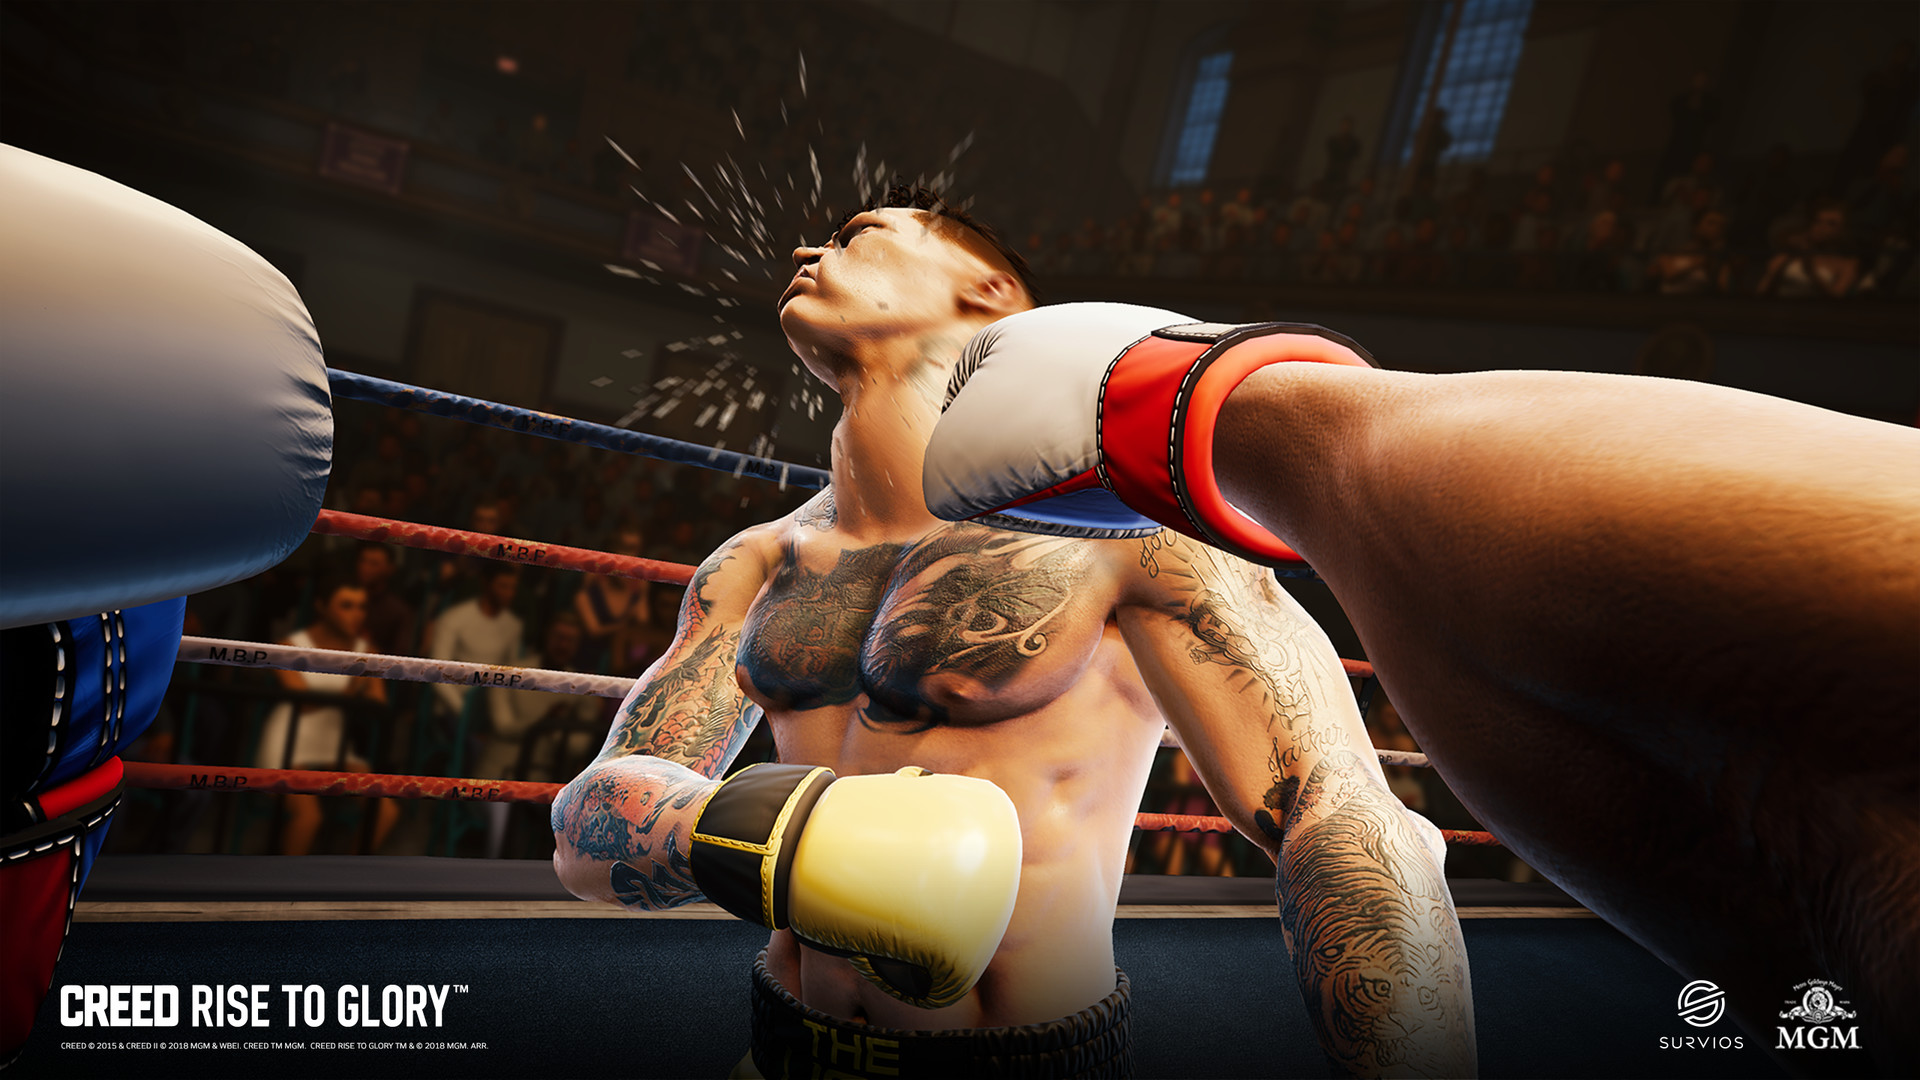 Creed glory vr. Creed VR ps4. Creed Rise to Glory. Creed Rise to Glory VR. Бокс Крид VR.